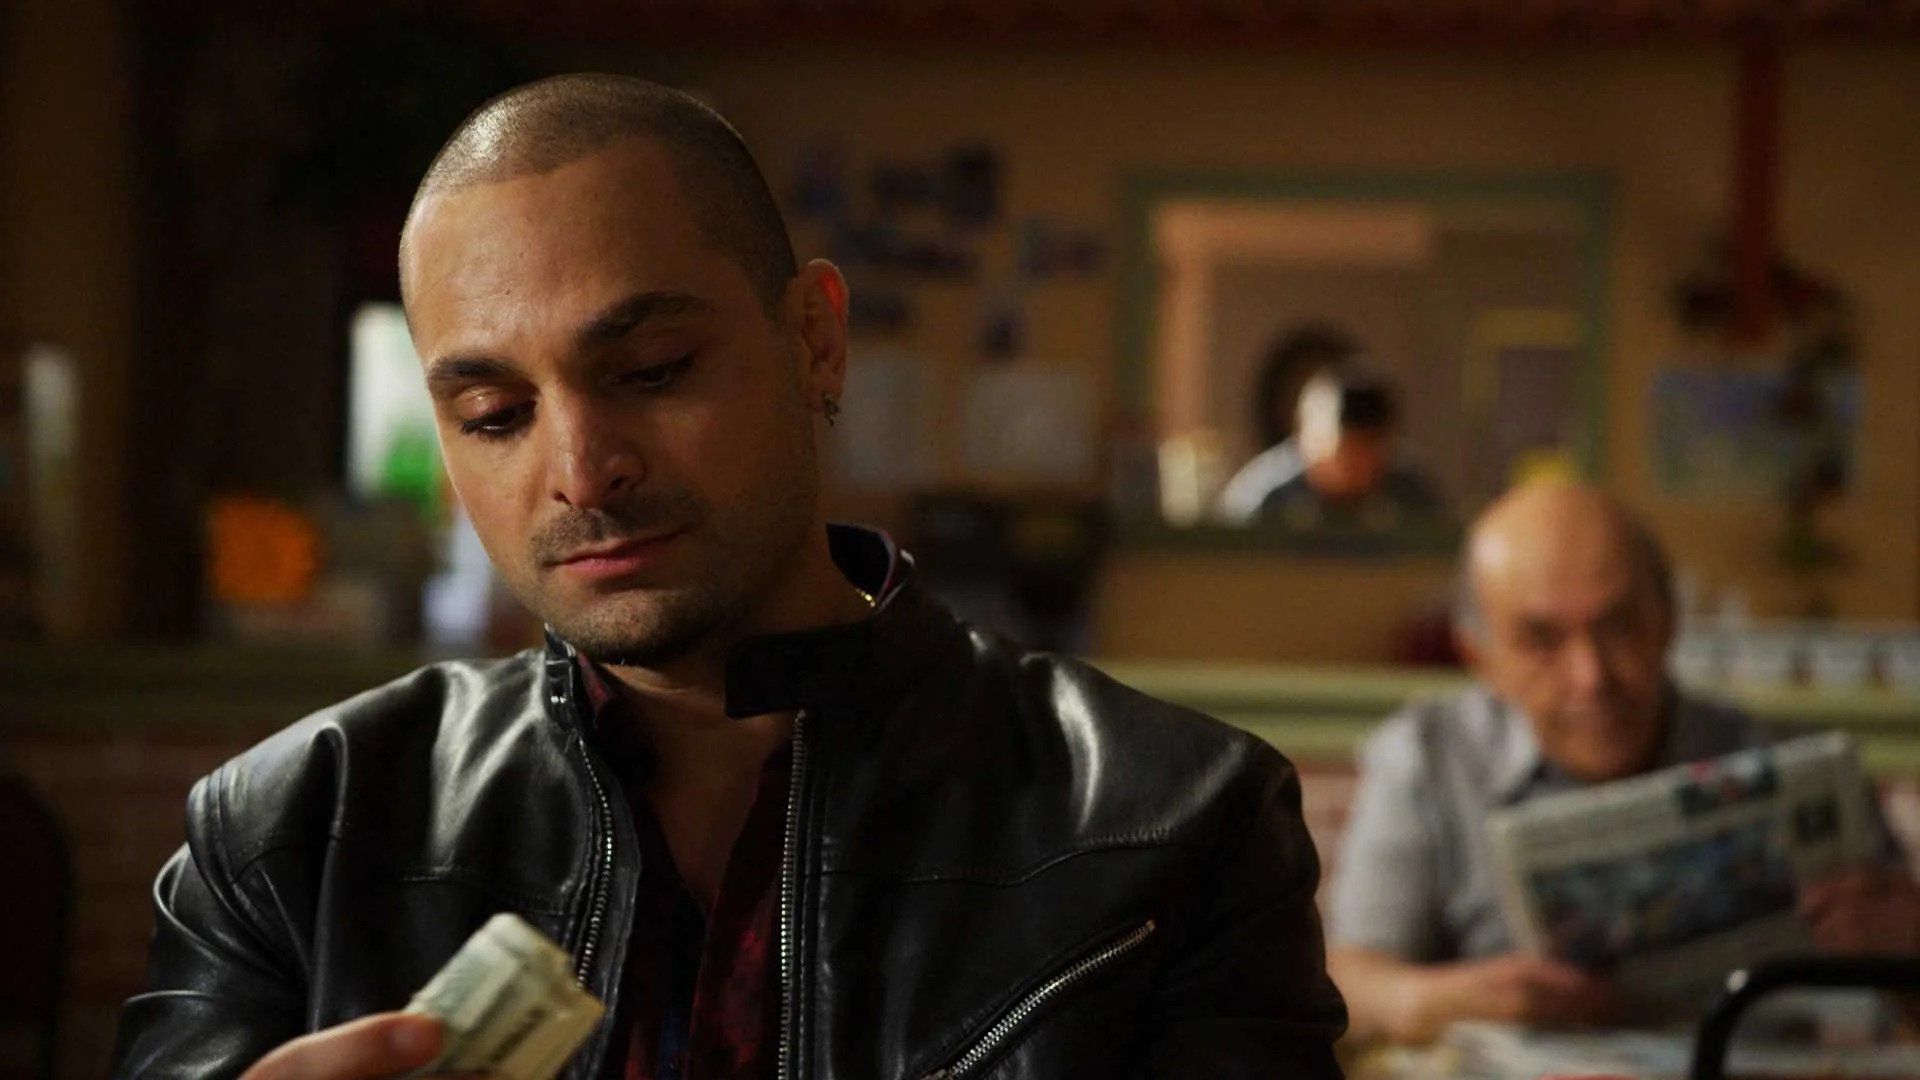 Nacho from "Better Call Saul" with some money, Hector looking at him from behind